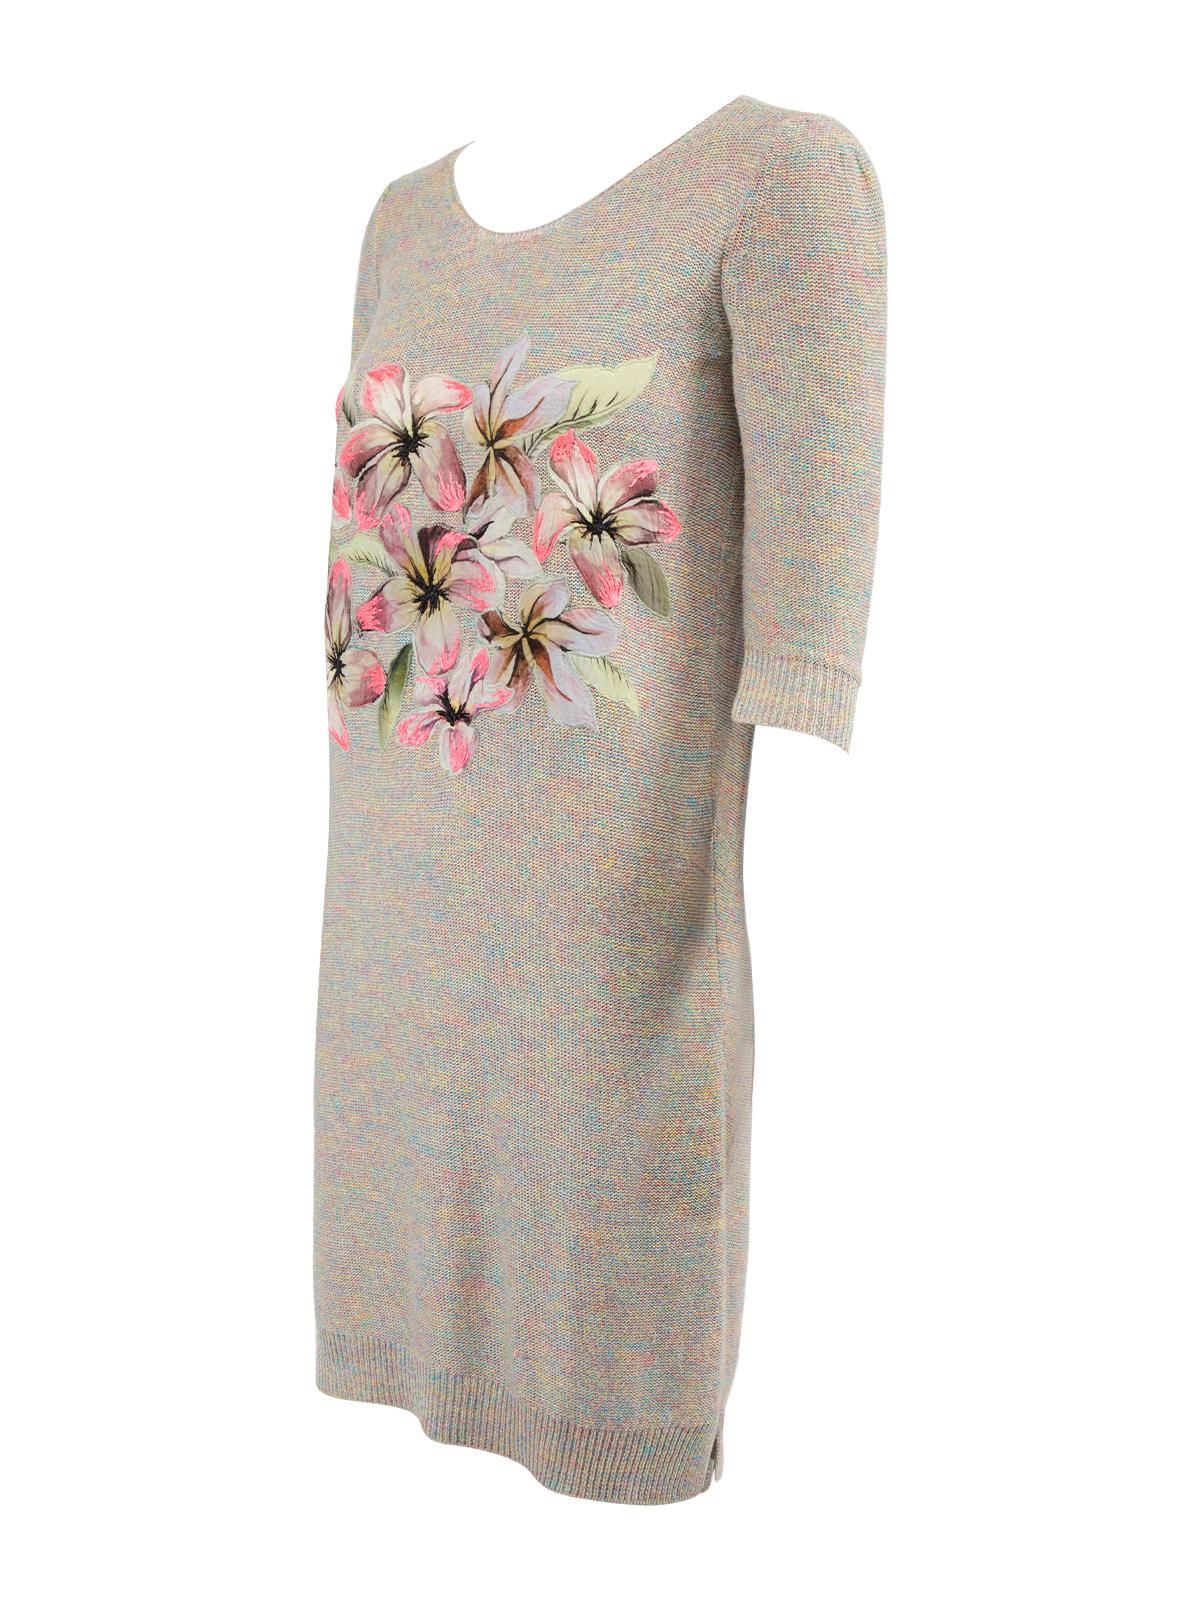 Pre-Loved Stella McCartney Women's Embroidered Knitted Mini Dress 1